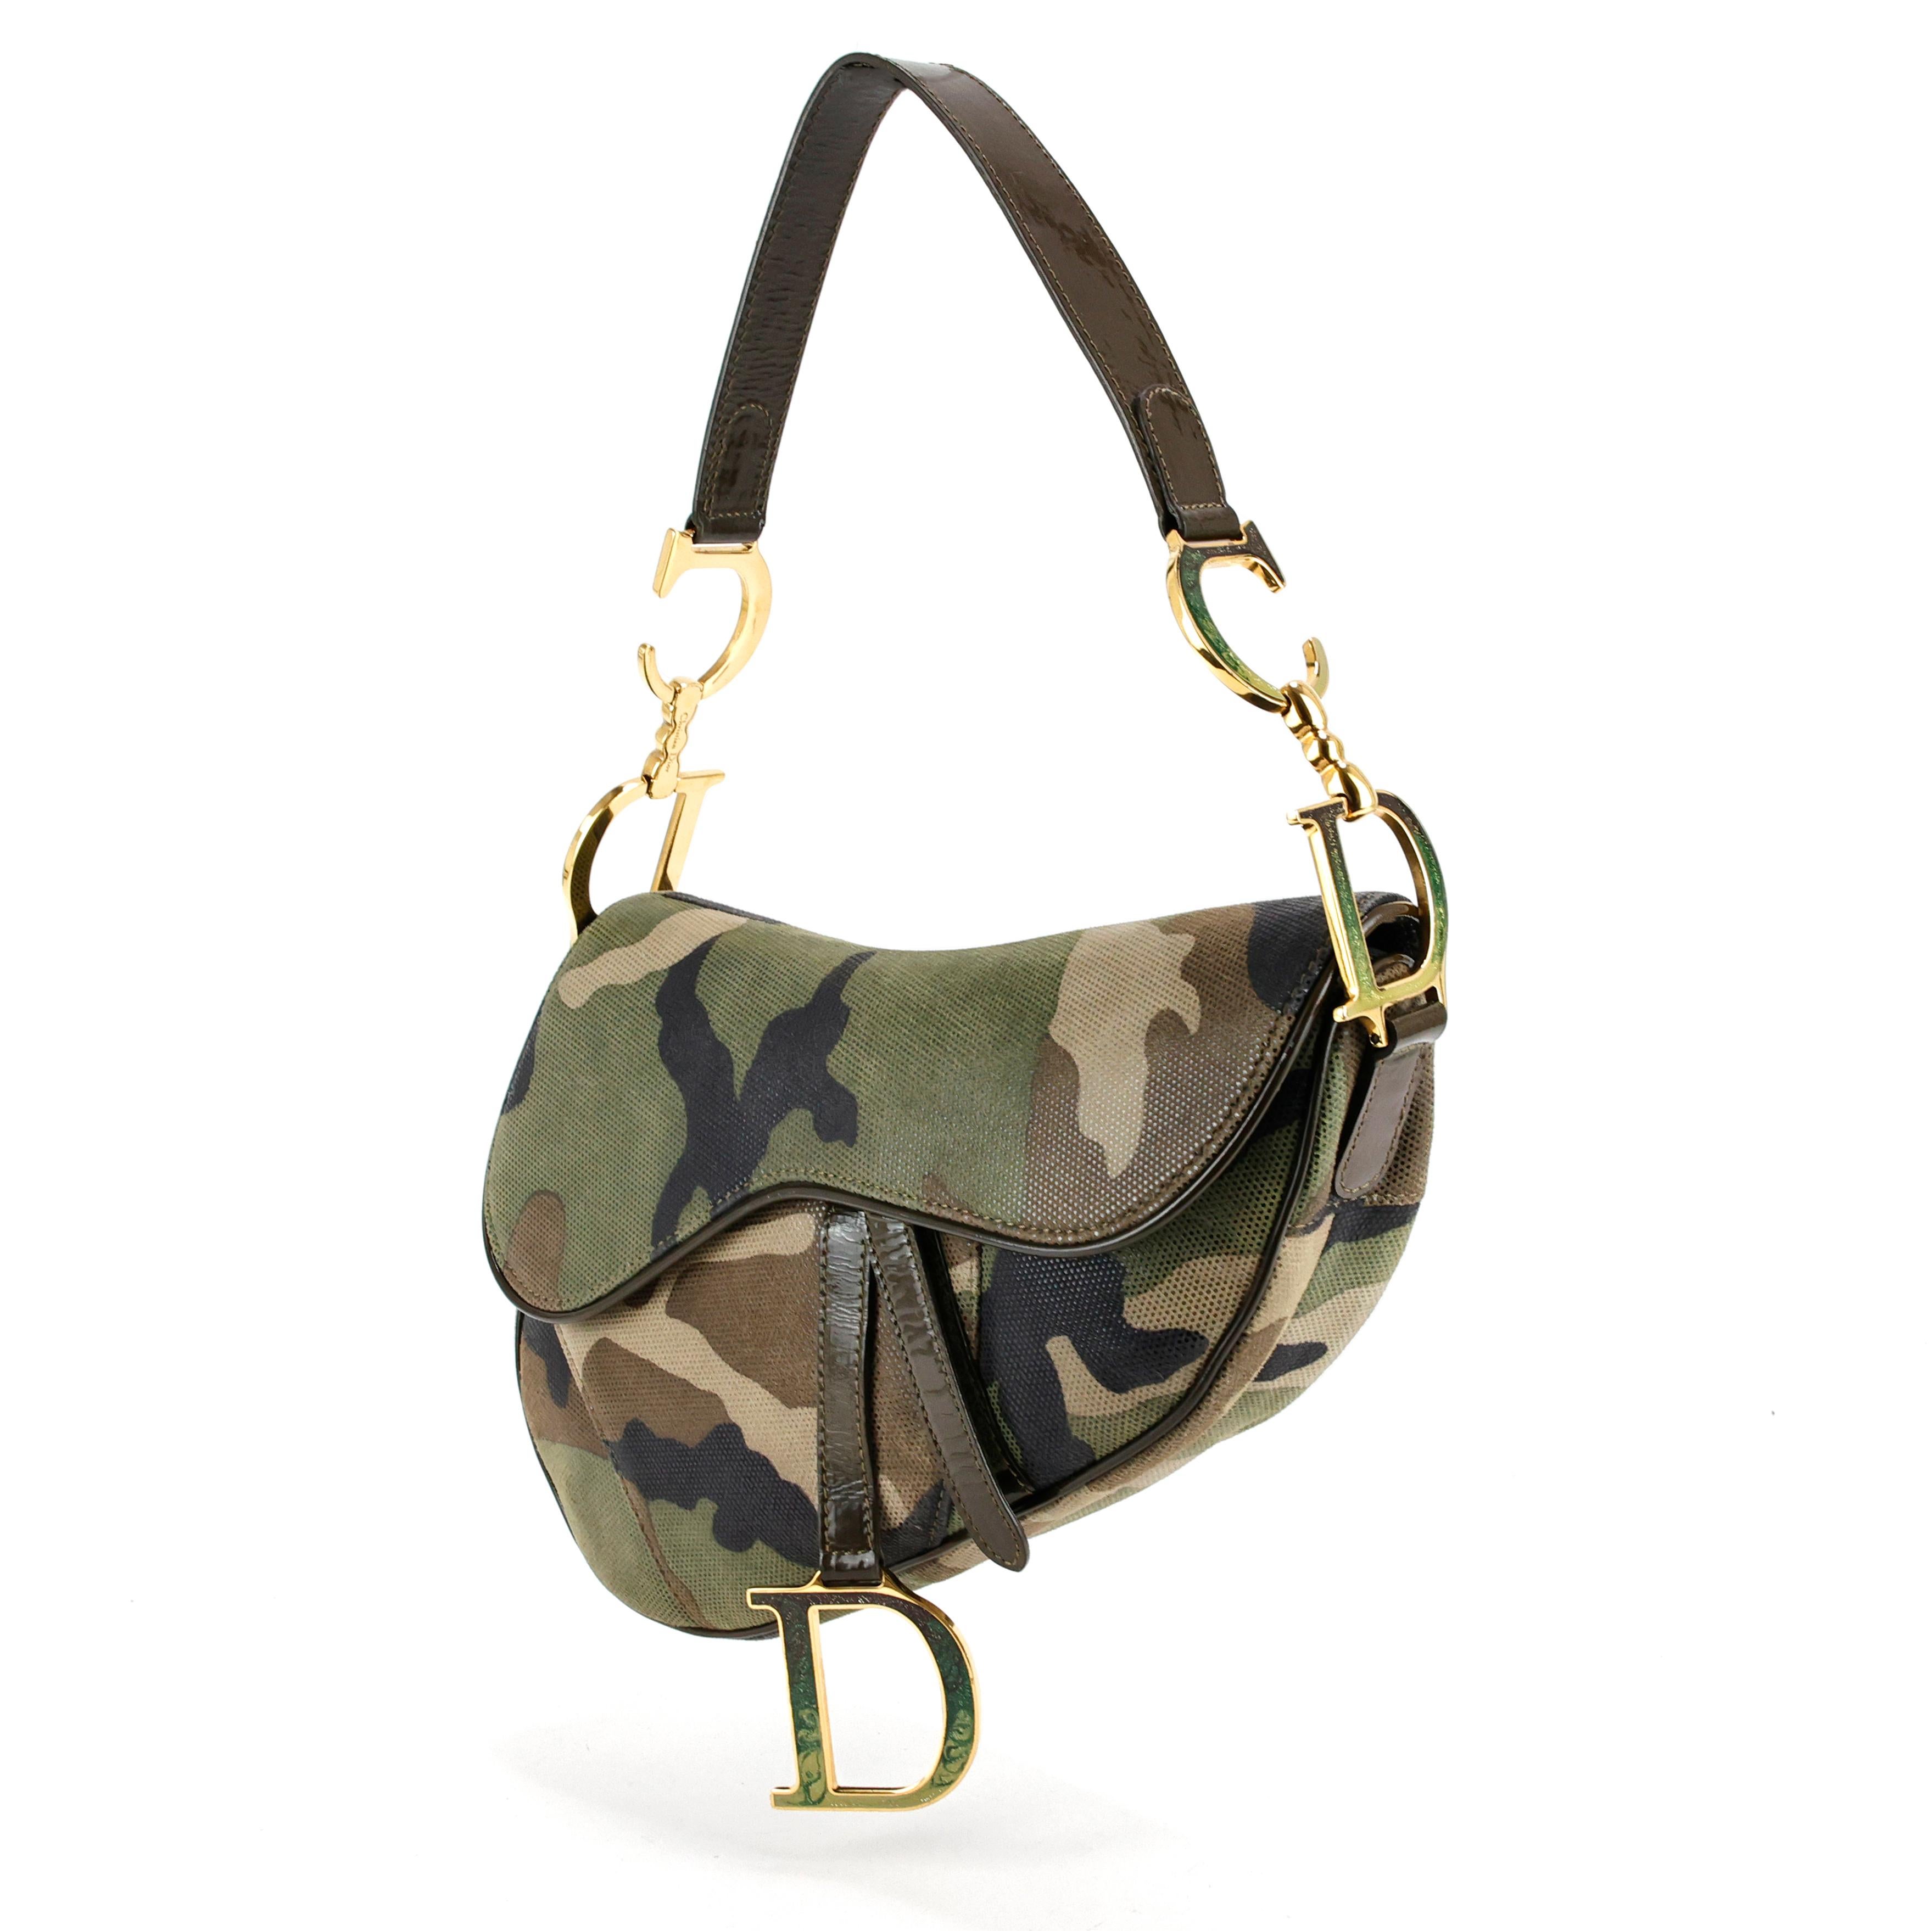 Christian Dior by John Galliano 2000s Camouflage Saddle bag In Excellent Condition For Sale In Bressanone, IT